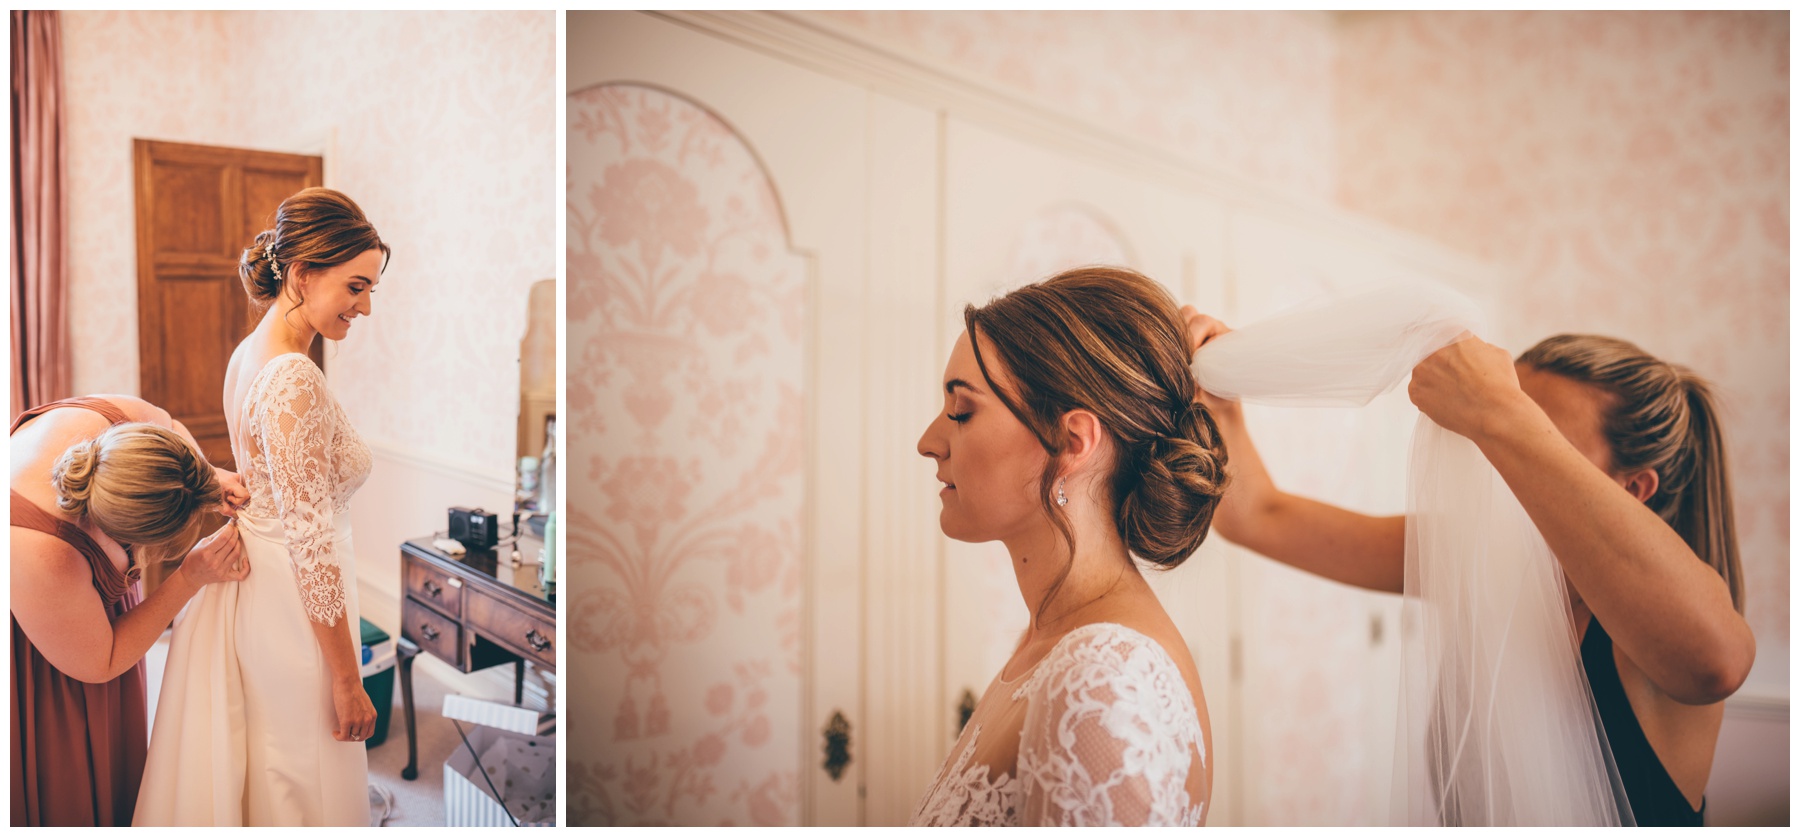 Beautiful bride gets ready before walking down the aisle at Tilstone House.